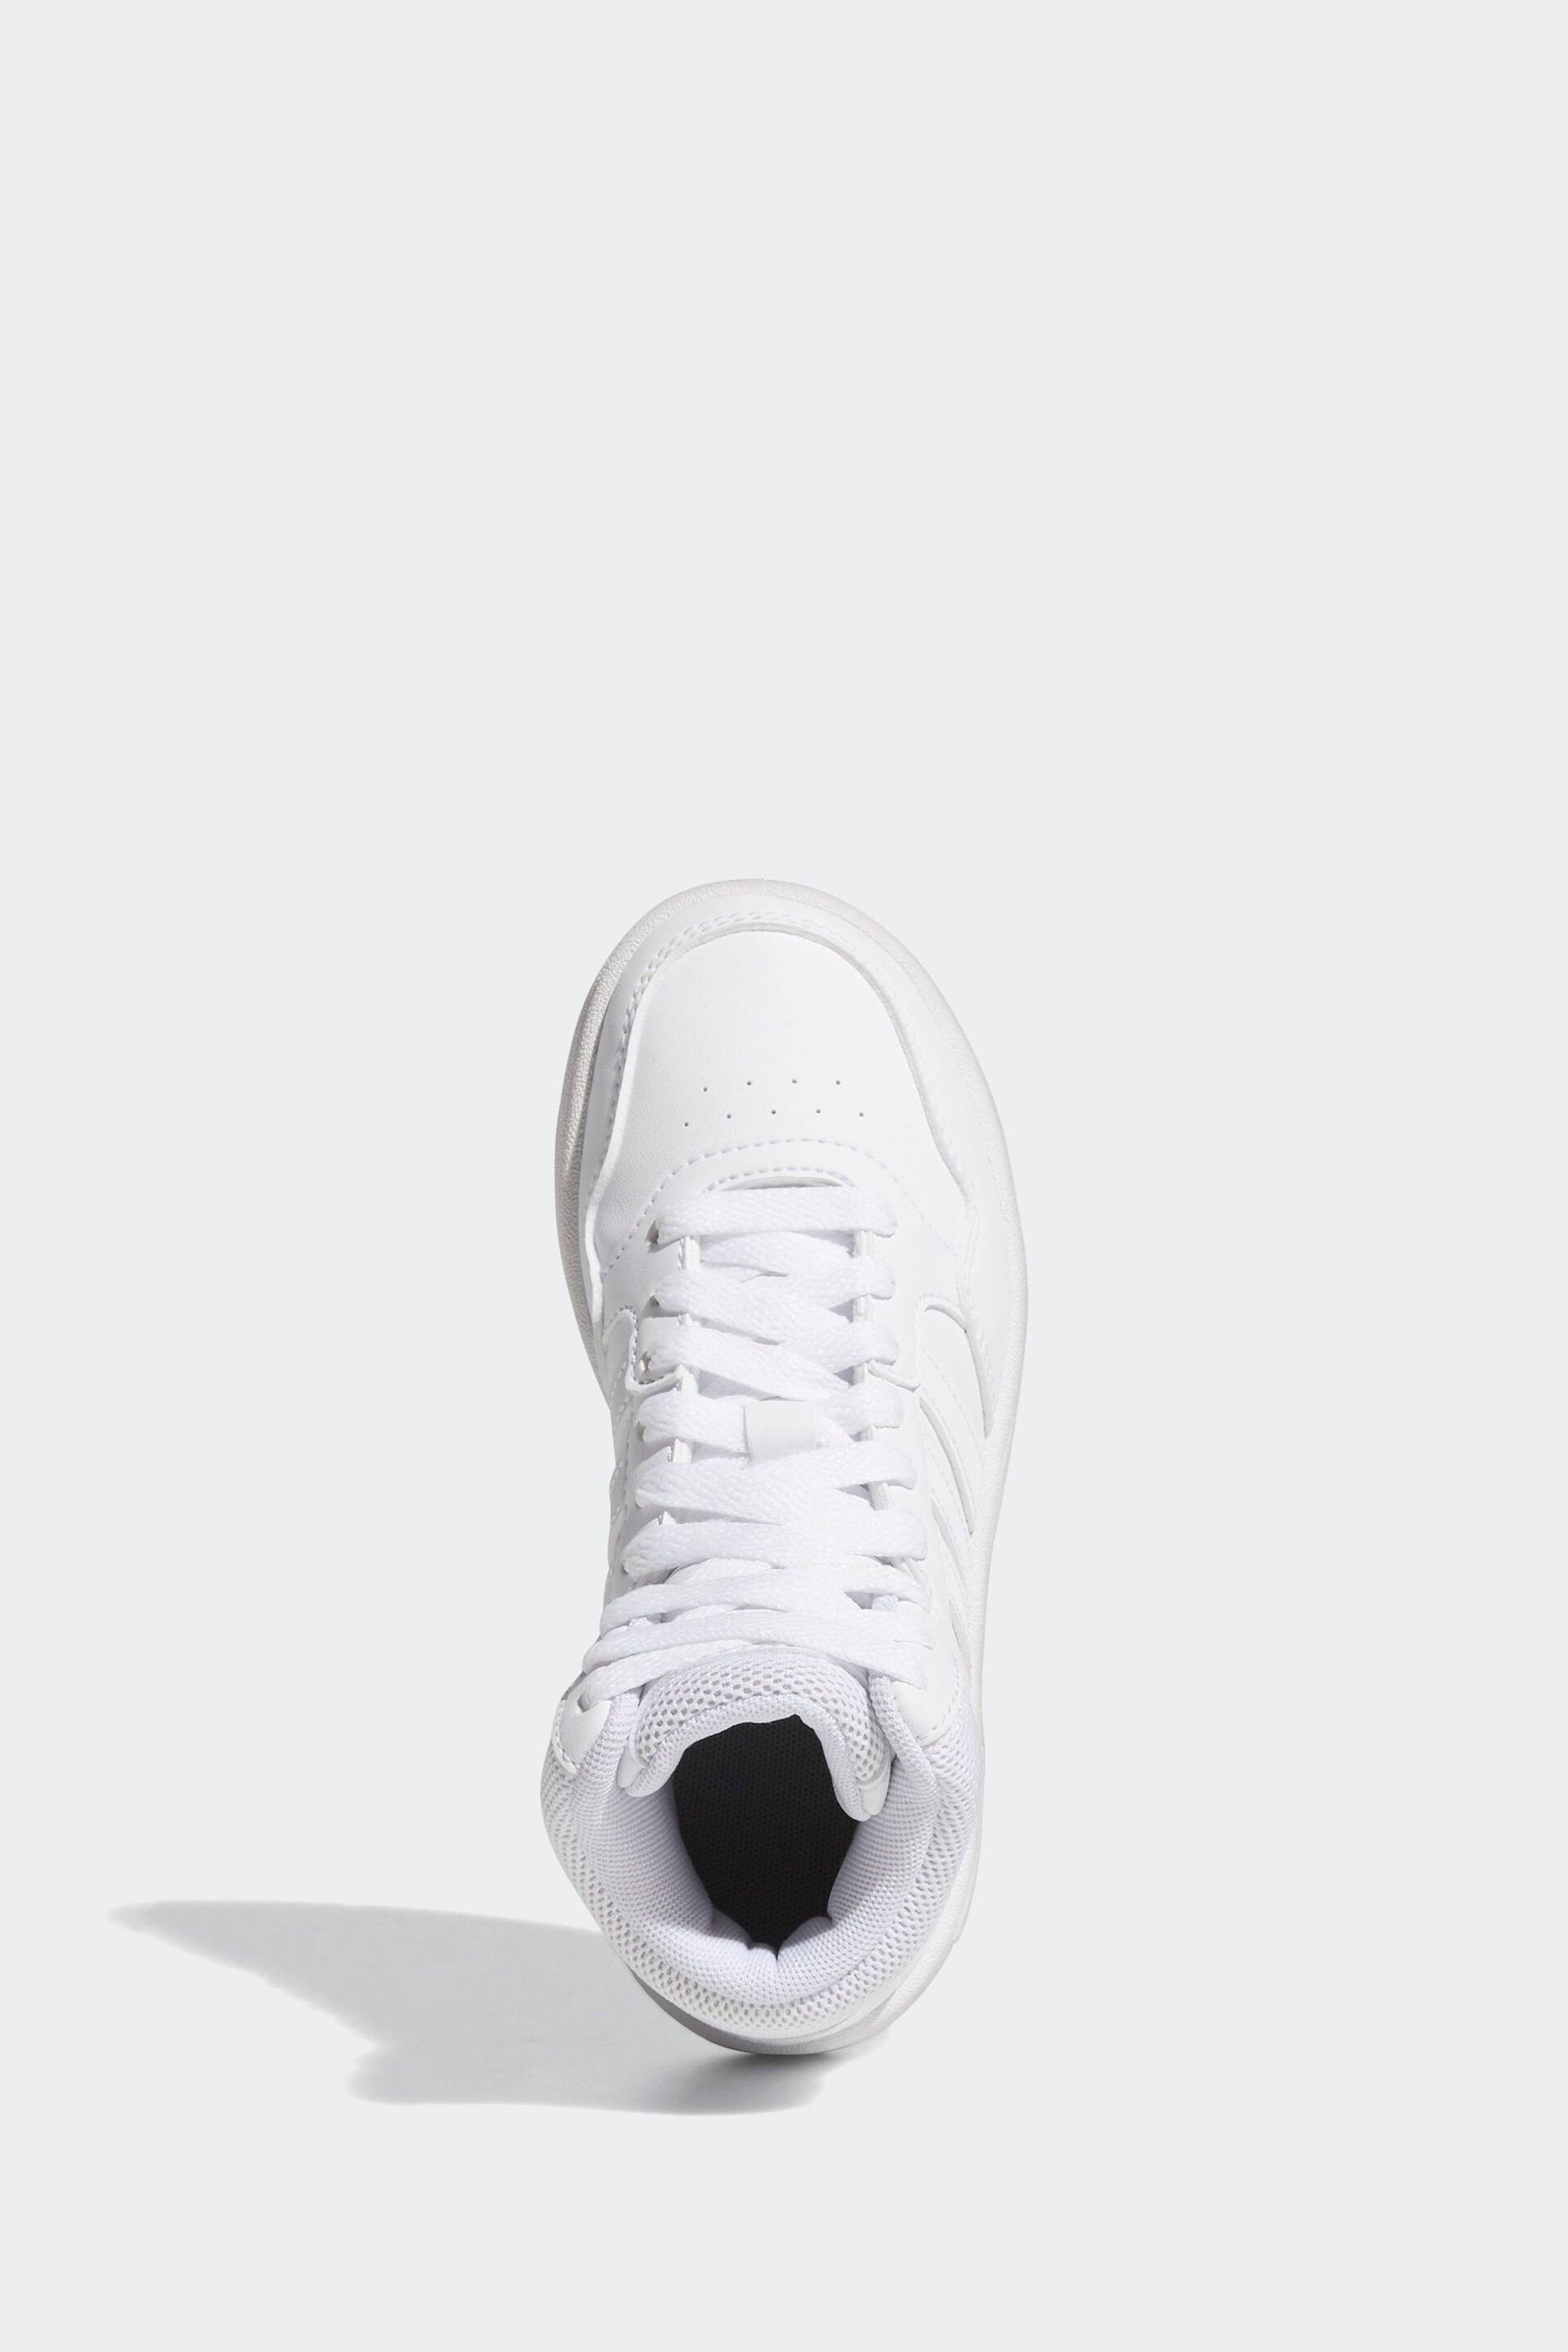 adidas White Hoops Mid Shoes - Image 6 of 9